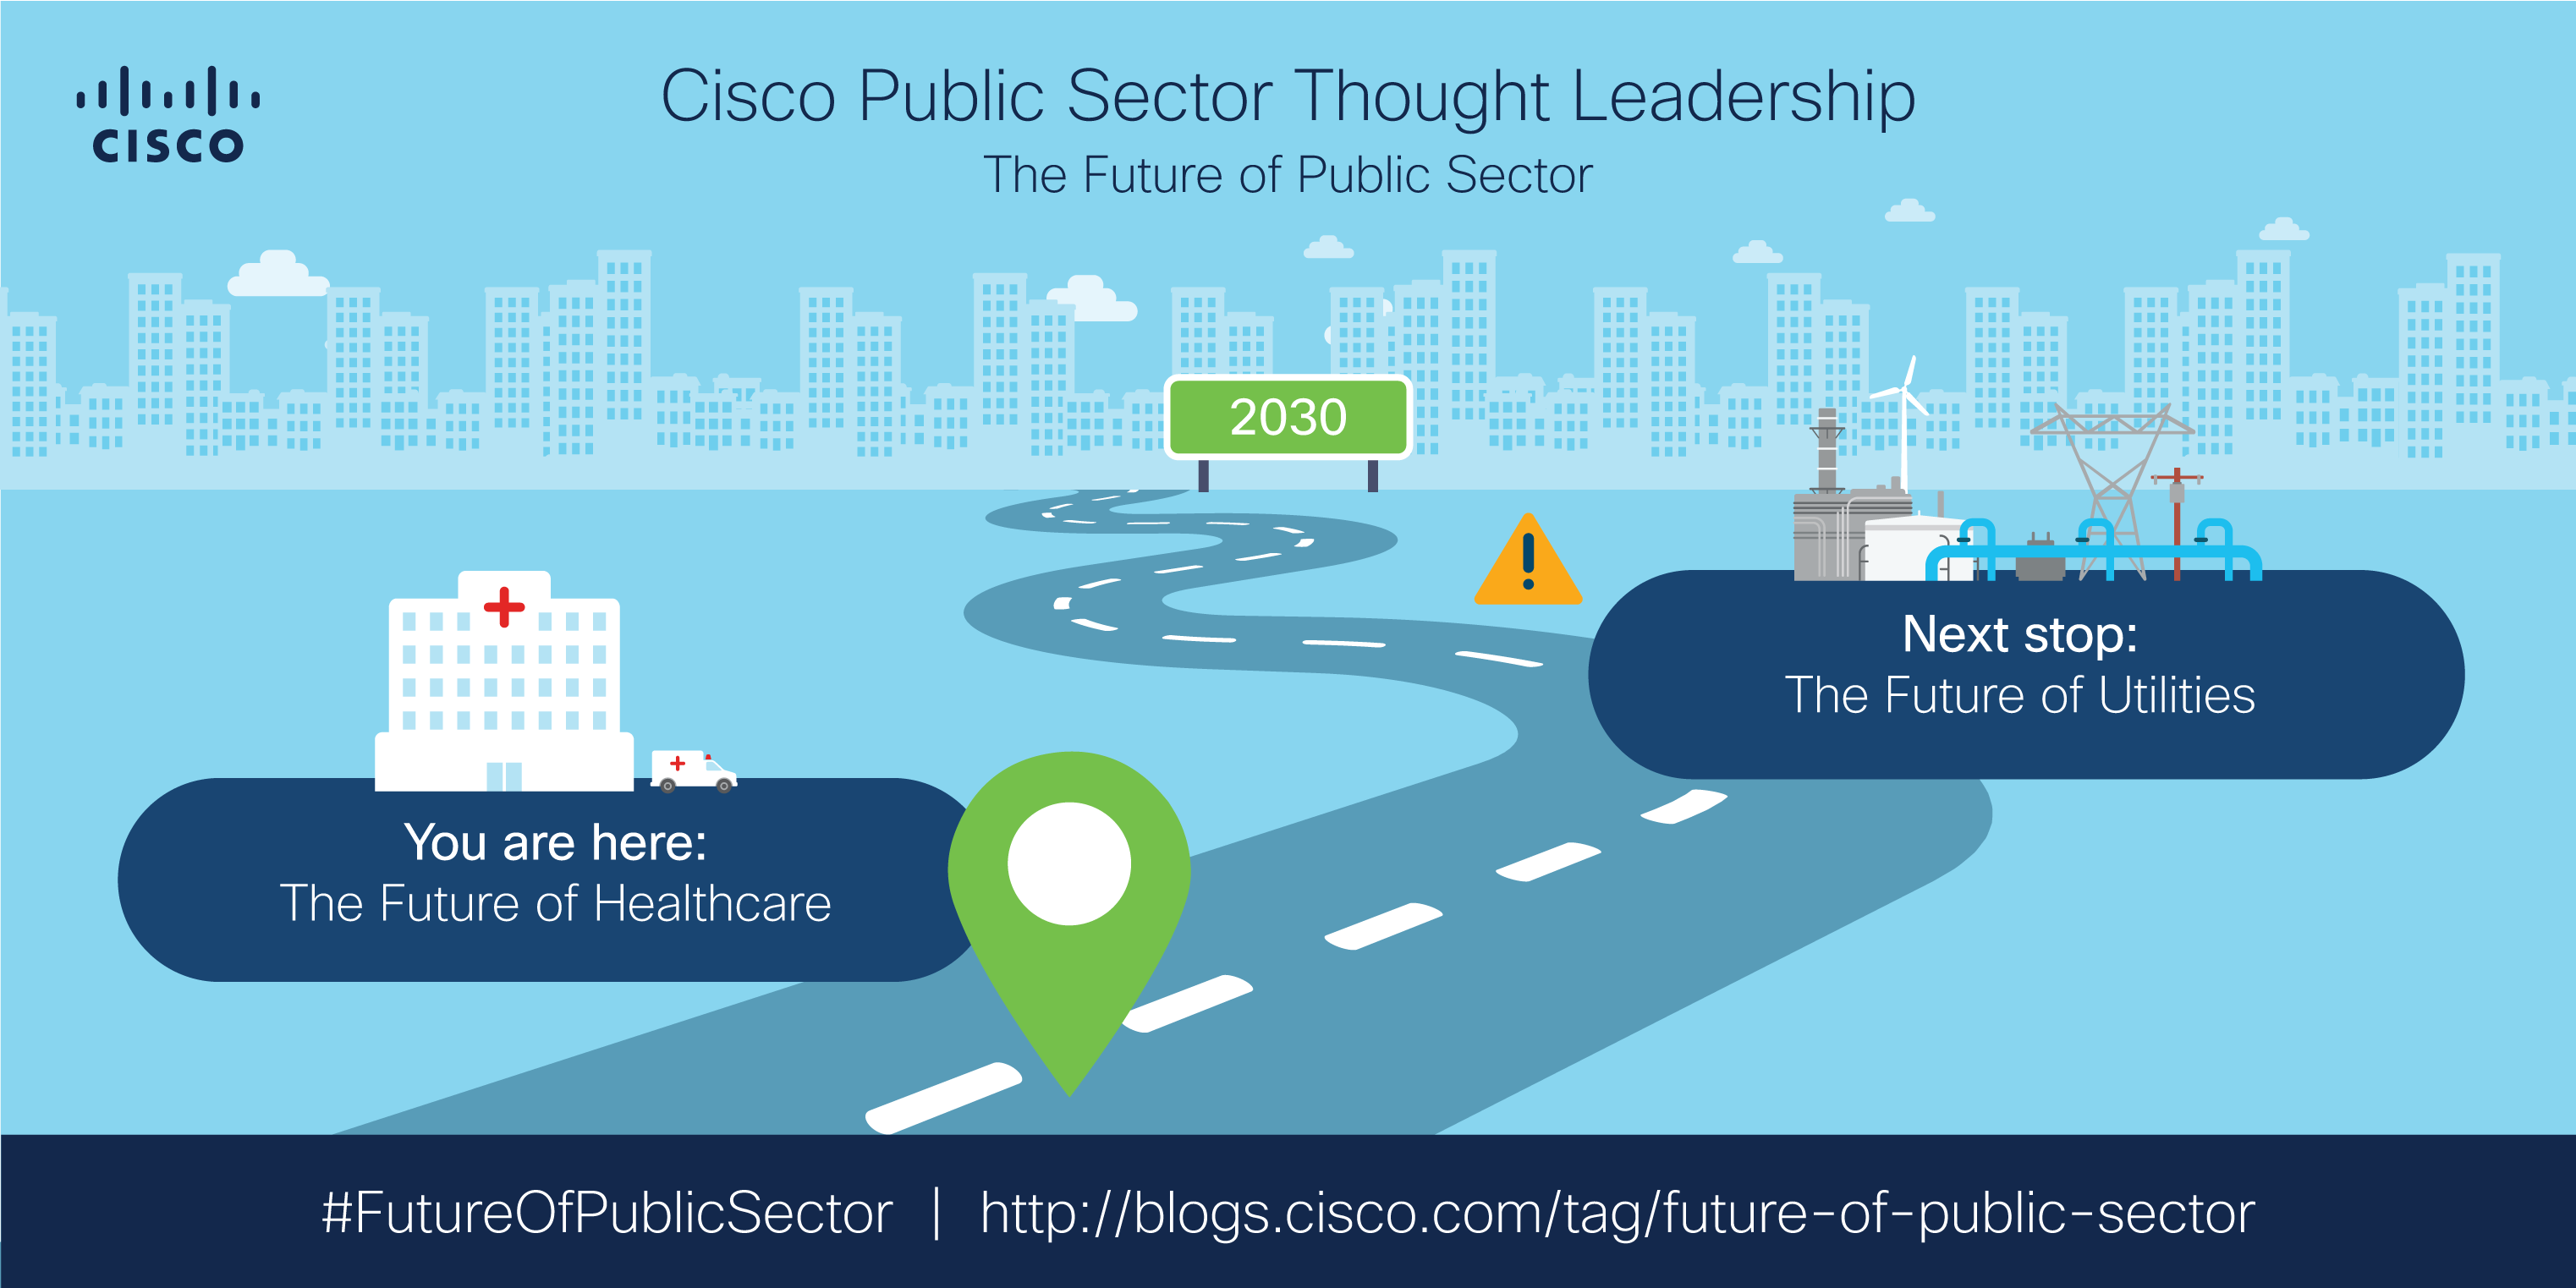 Roadmap for the future of public sector: next stop, future of utilities